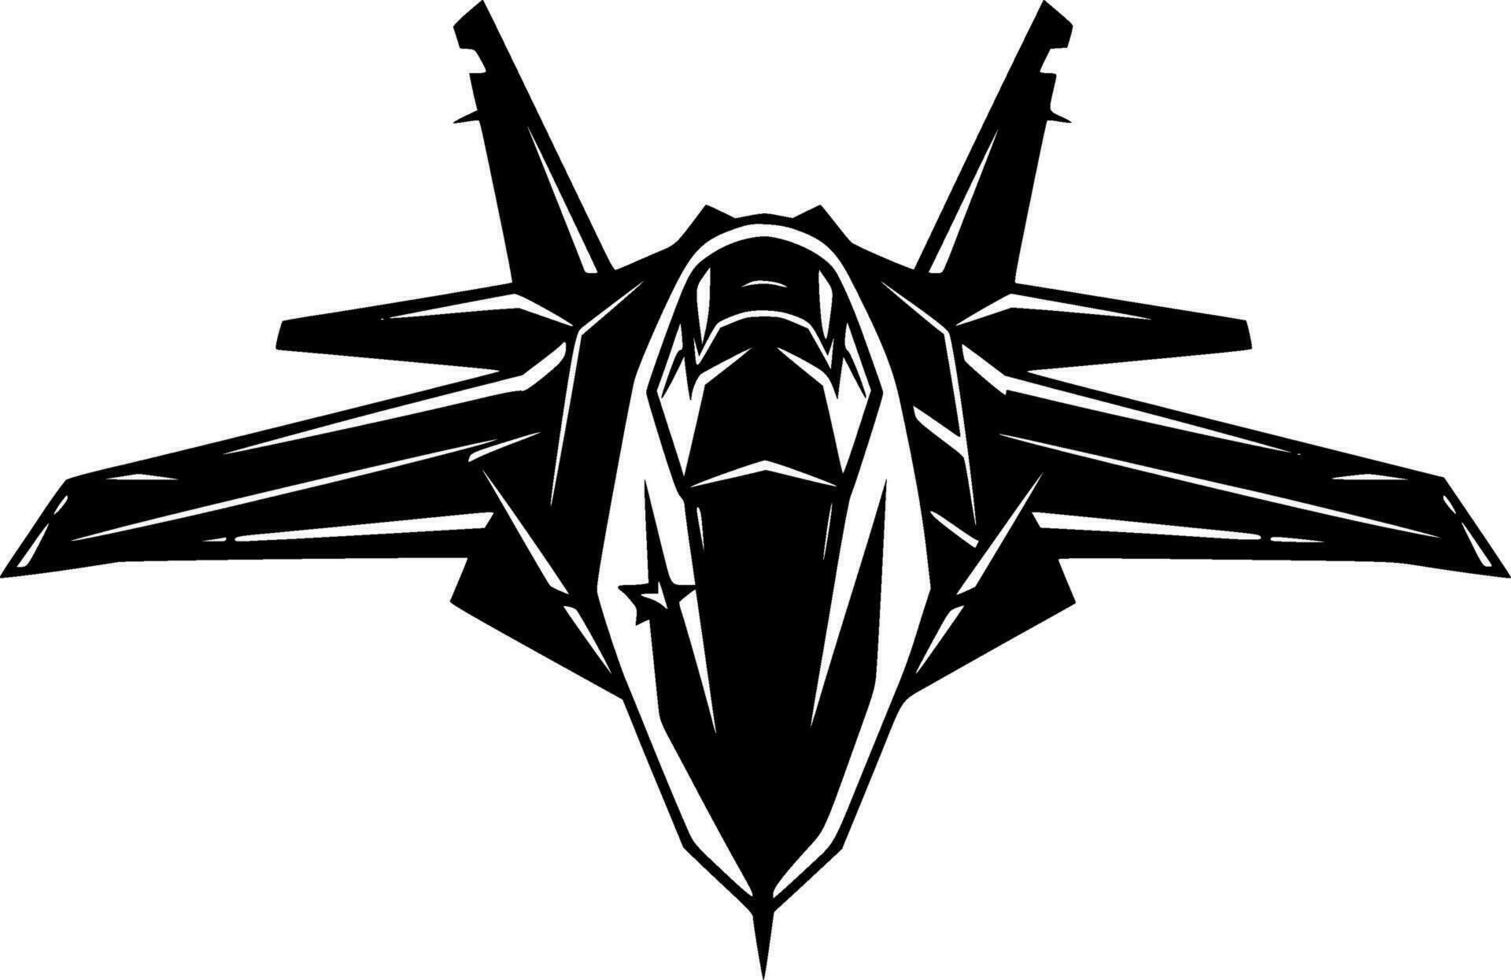 Fighter Jet - High Quality Vector Logo - Vector illustration ideal for T-shirt graphic